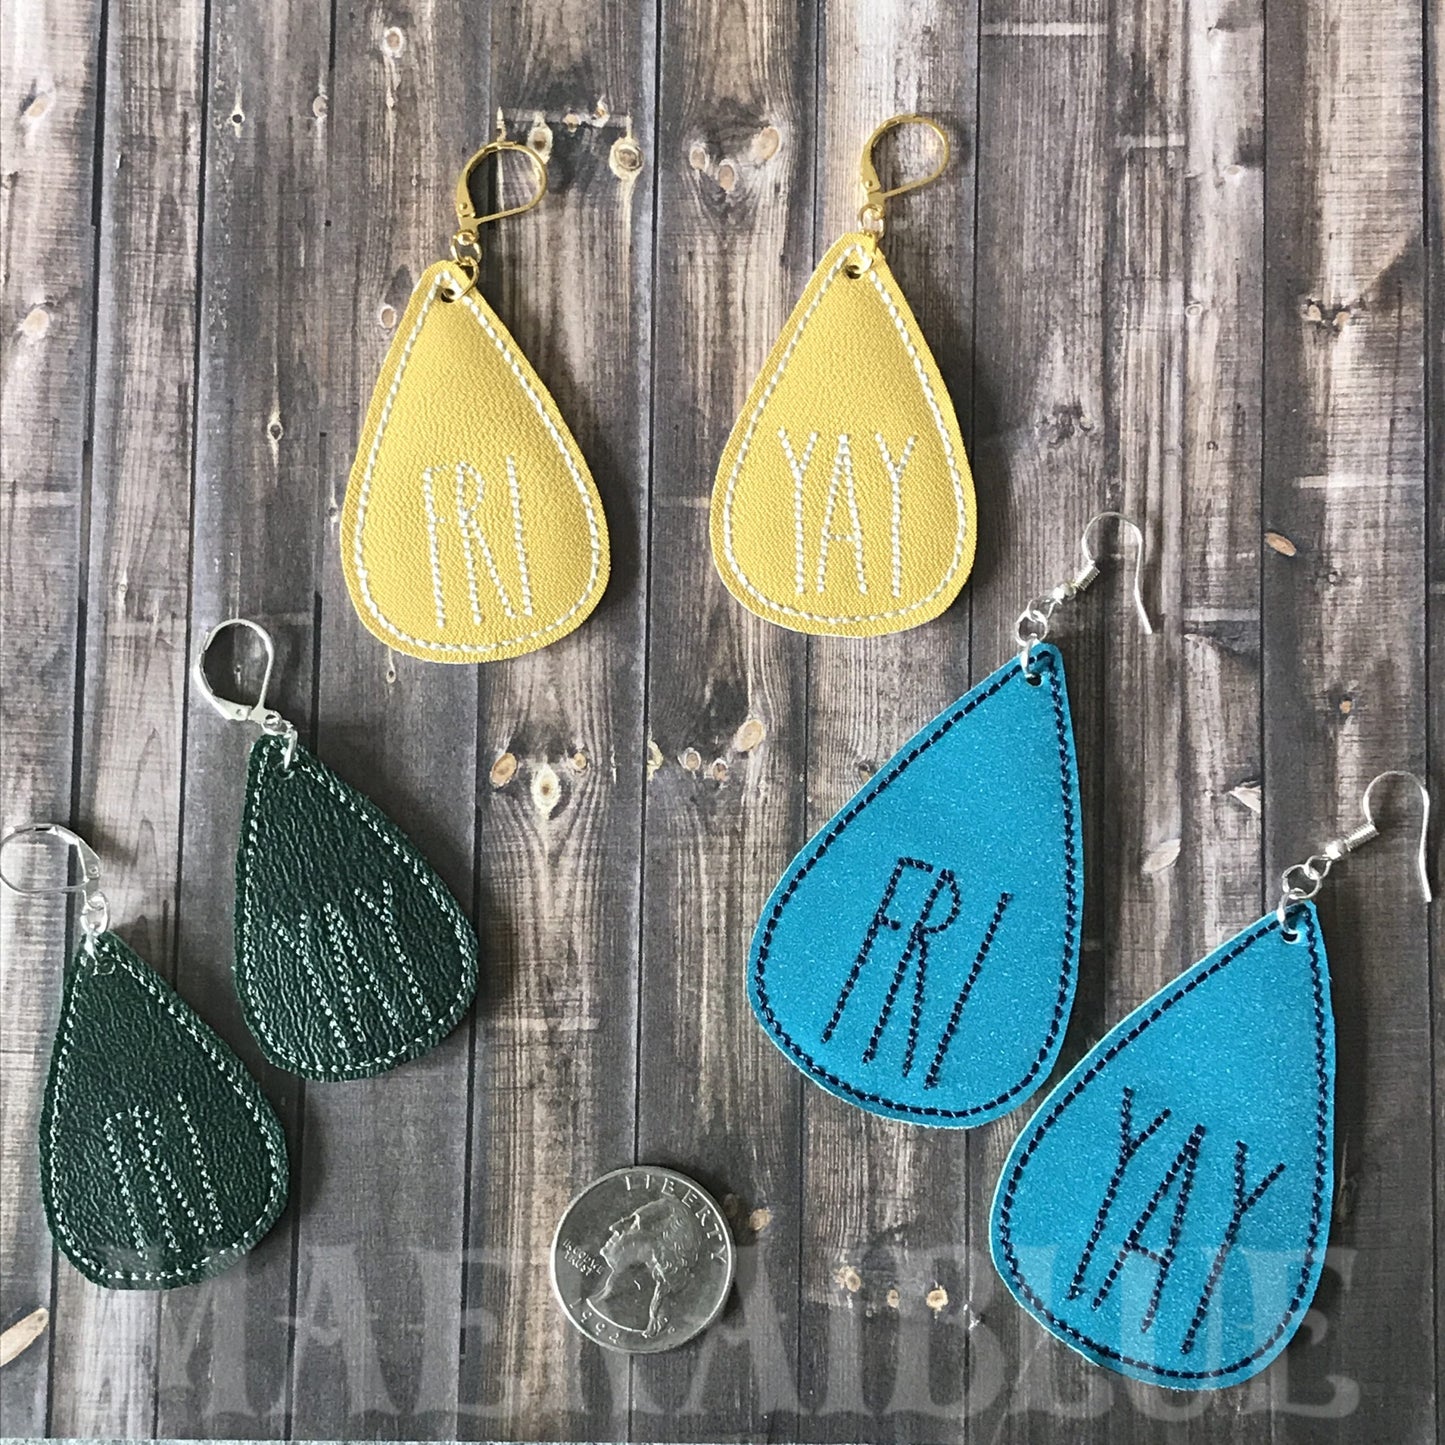 FRI YAY Earrings - 3 sizes - 4x4 and 5x7 Grouped- Digital Embroidery Design